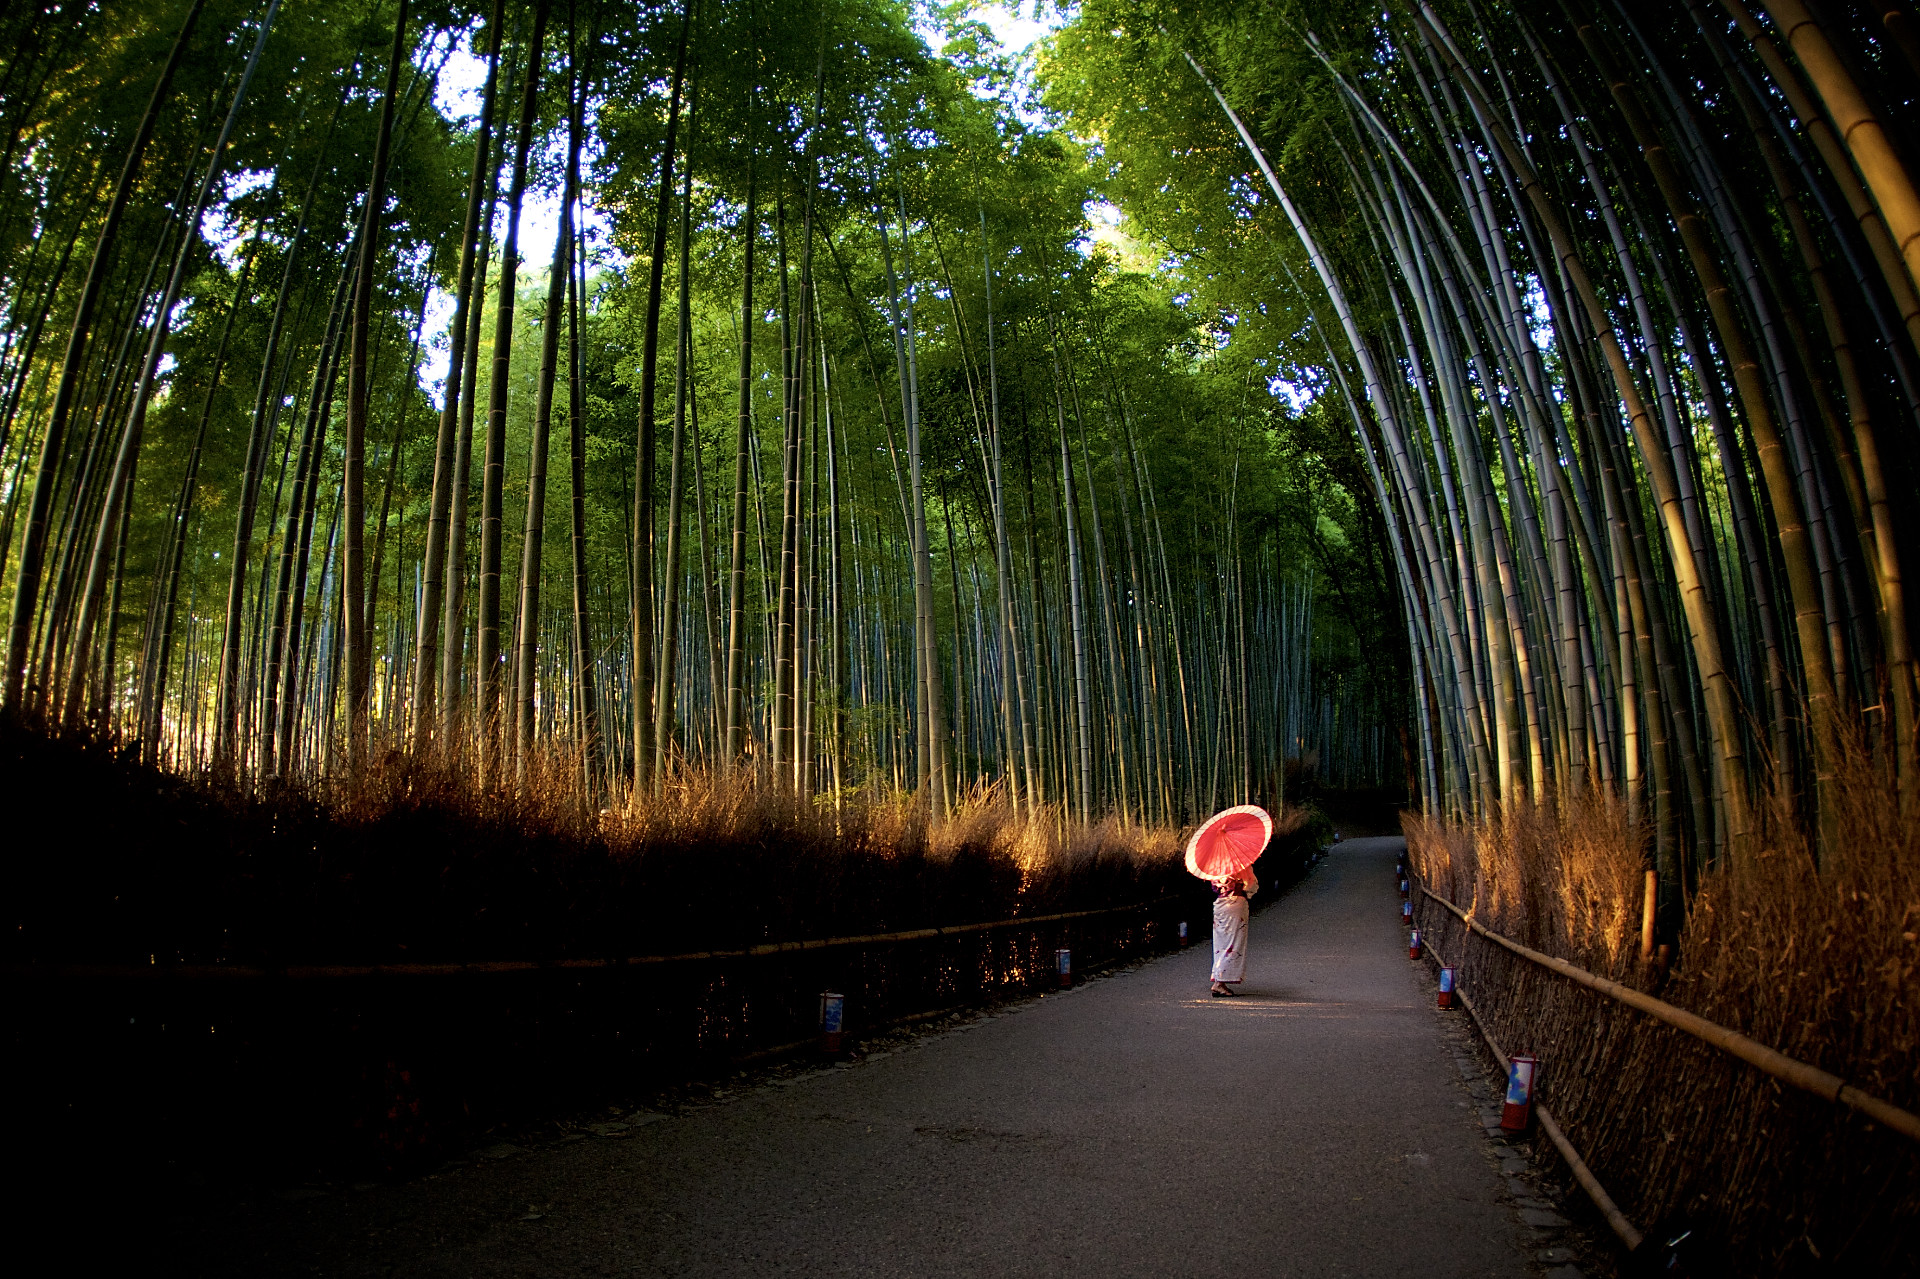 <p>On paper, the Arashiyama Bamboo Grove seems like a must-see attraction. After all, there is something so magical about <strong>being amongst the bamboo trees while the sunlight pierces through. </strong>On top of the forest's serenity, the promise of seeing monkeys is the delightful cherry on top.</p>  <p>However, some visitors were deeply disappointed by the grove.</p>